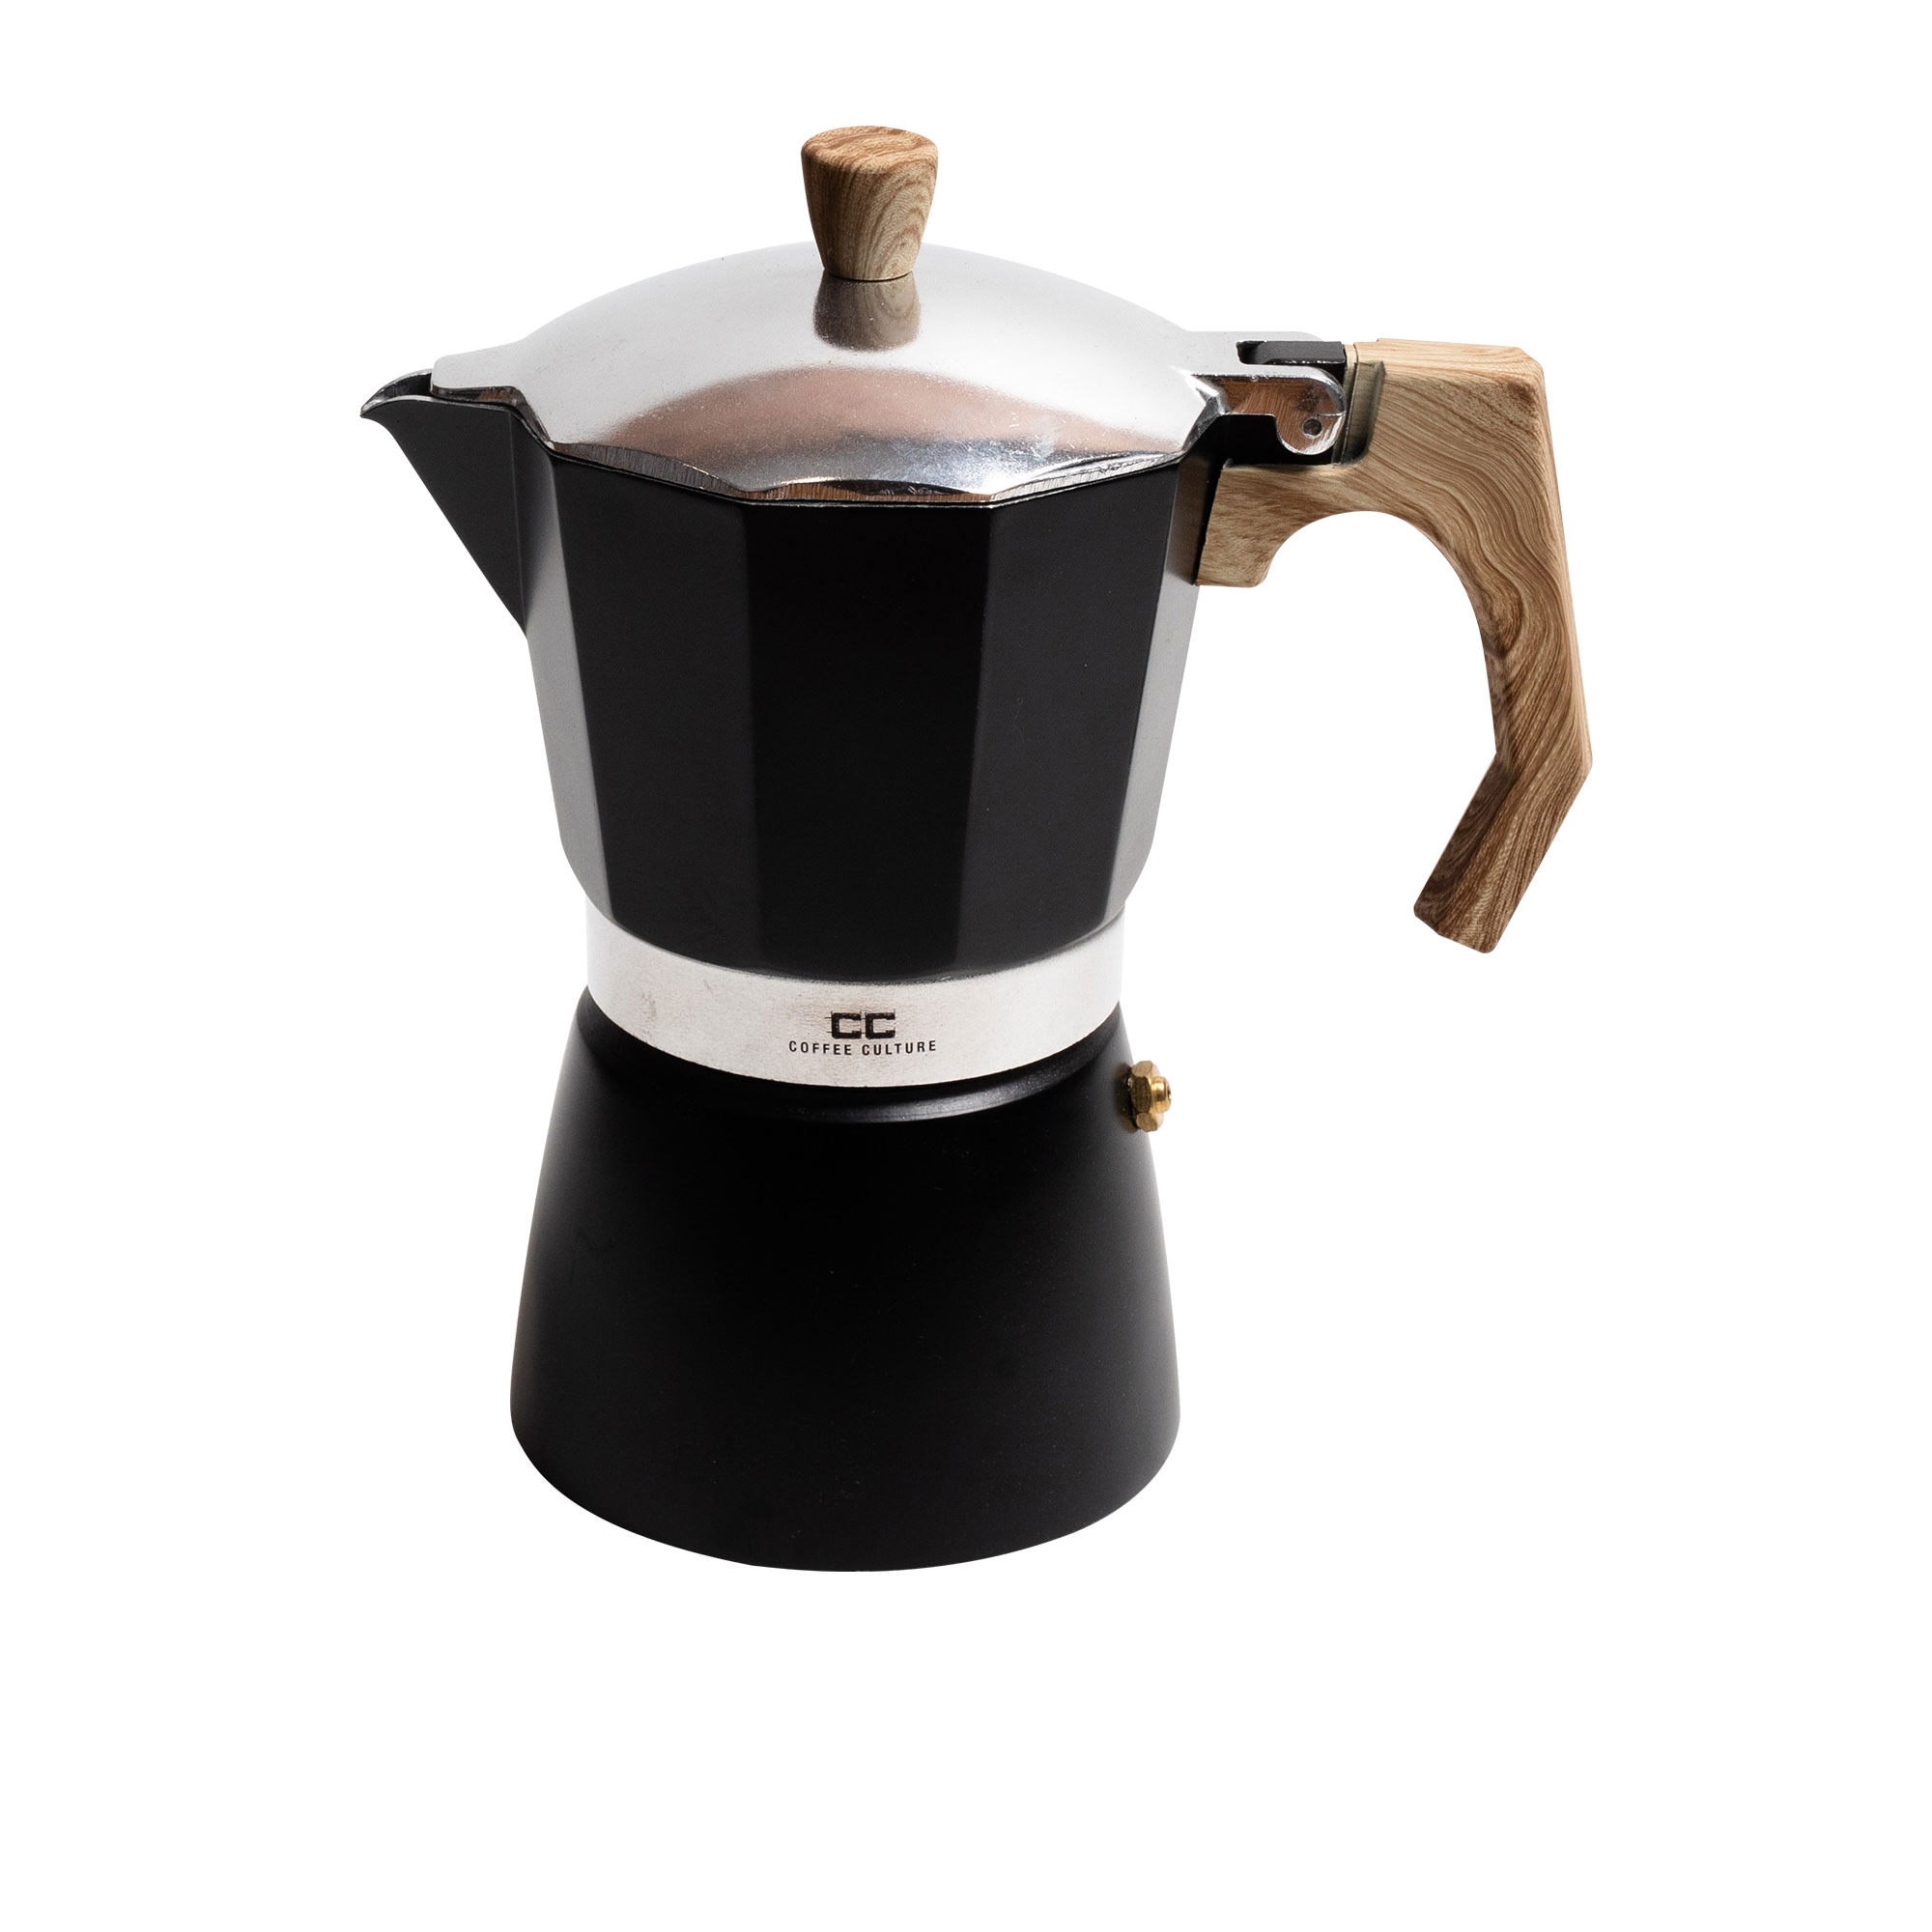 Coffee Culture Coffee Maker 9 Cup Black Image 1